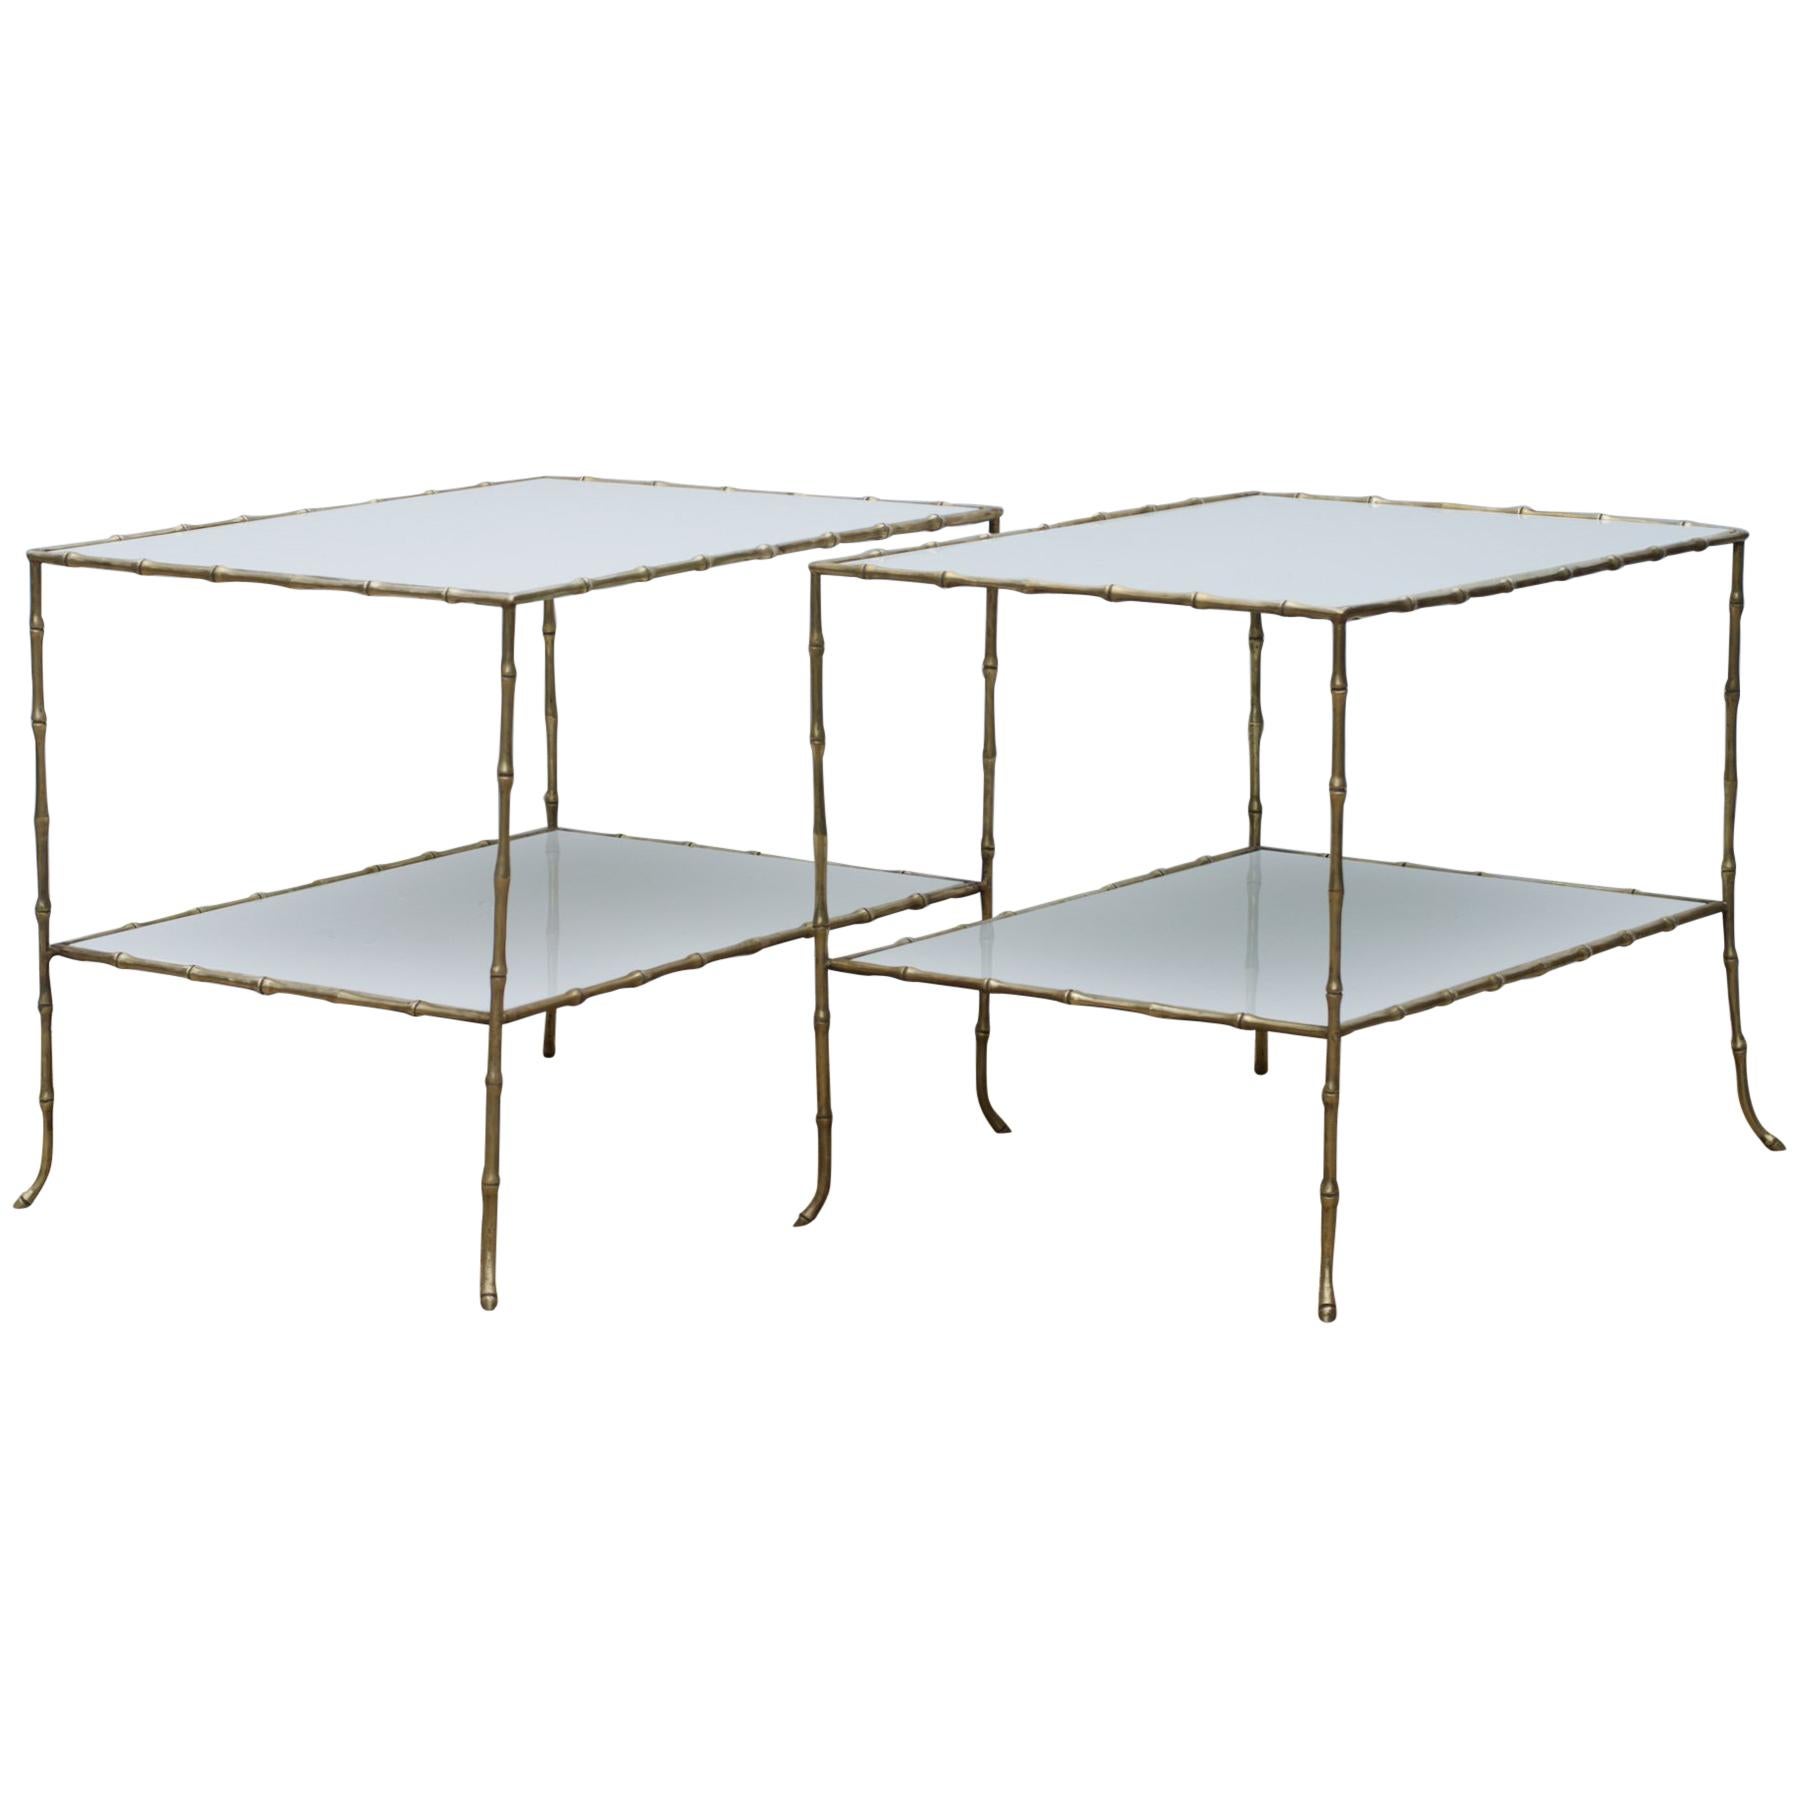 Maison Bagues Faux Bamboo Tables Having White Glass Tops